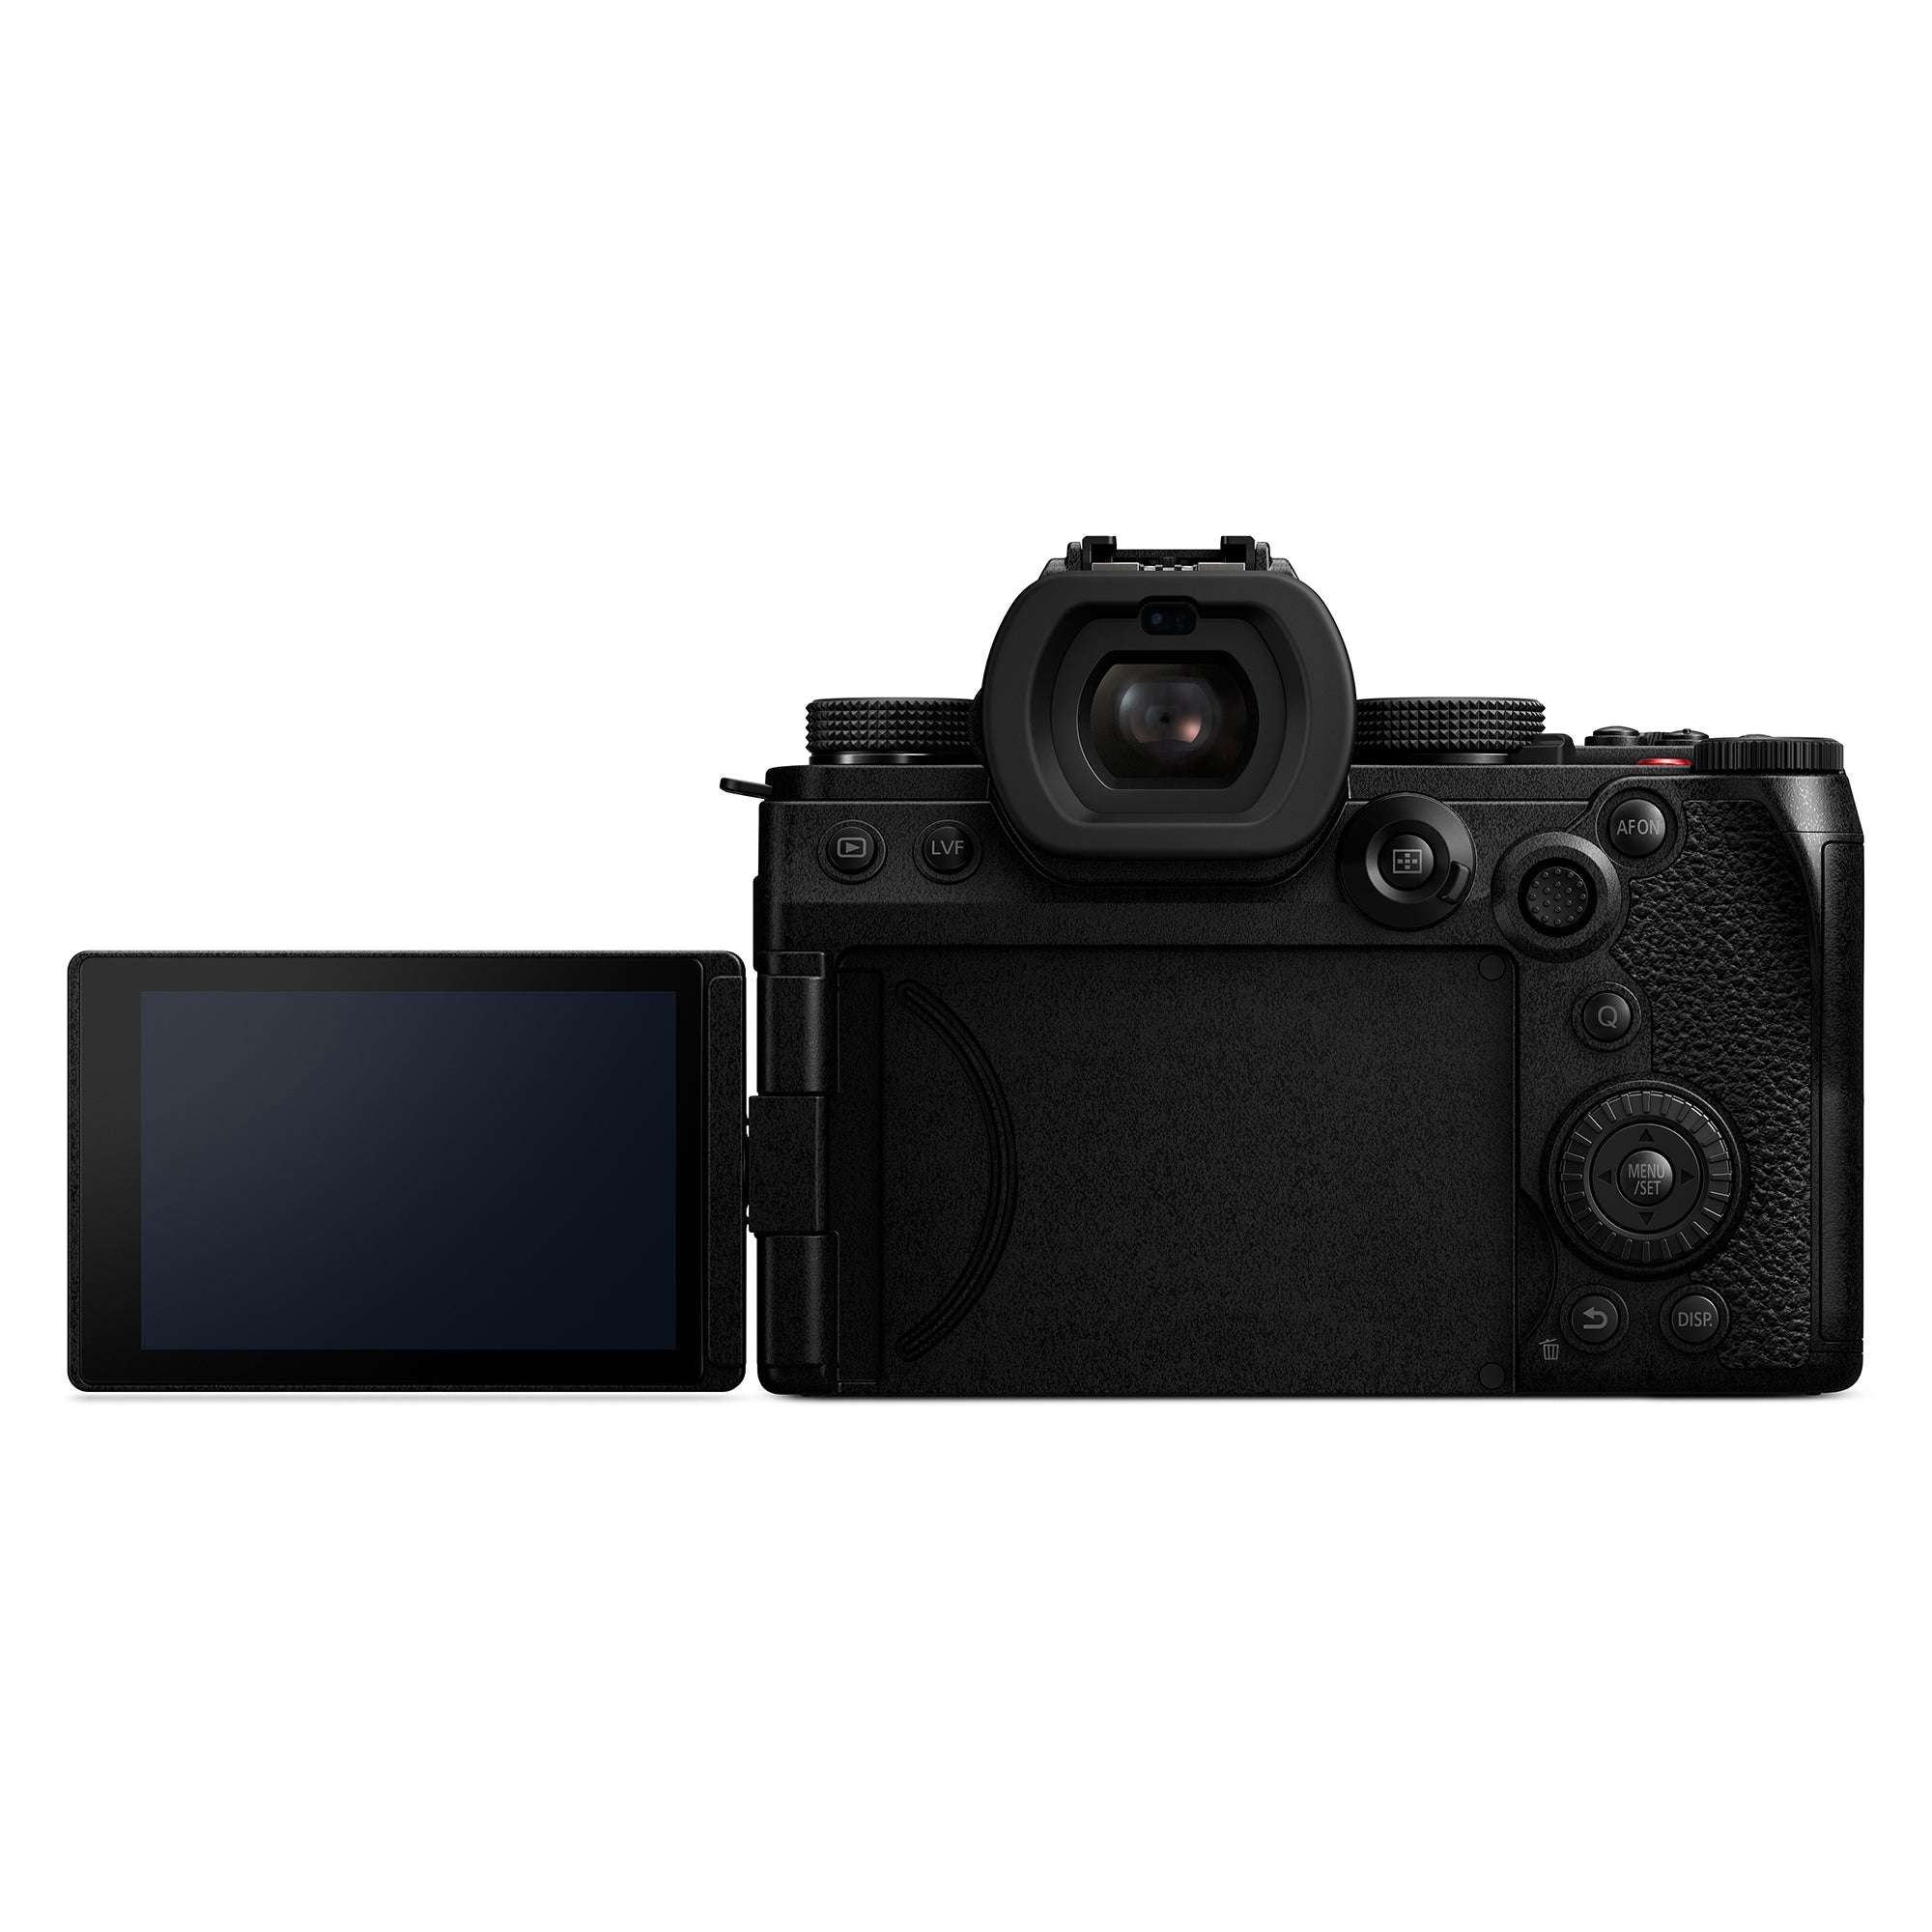 Panasonic LUMIX S5 Full Frame Mirrorless Camera (DC-S5BODY) with LUMIX S  Series 85mm F1.8 L Mount Interchangeable Lens (S-S85)